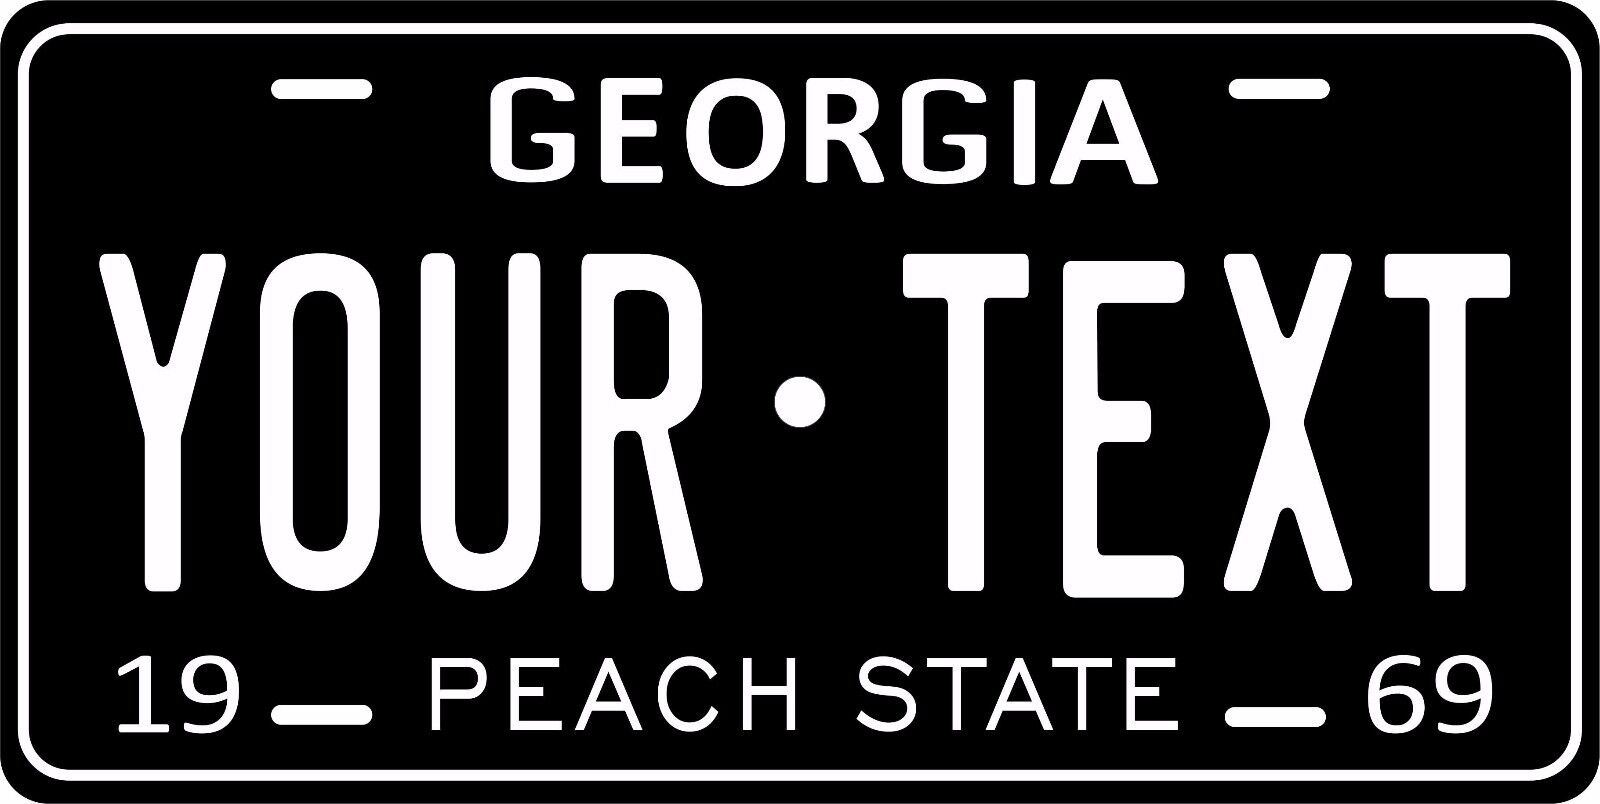 Georgia 1969 License Plate Personalized Custom Car Auto Bike Motorcycle Moped